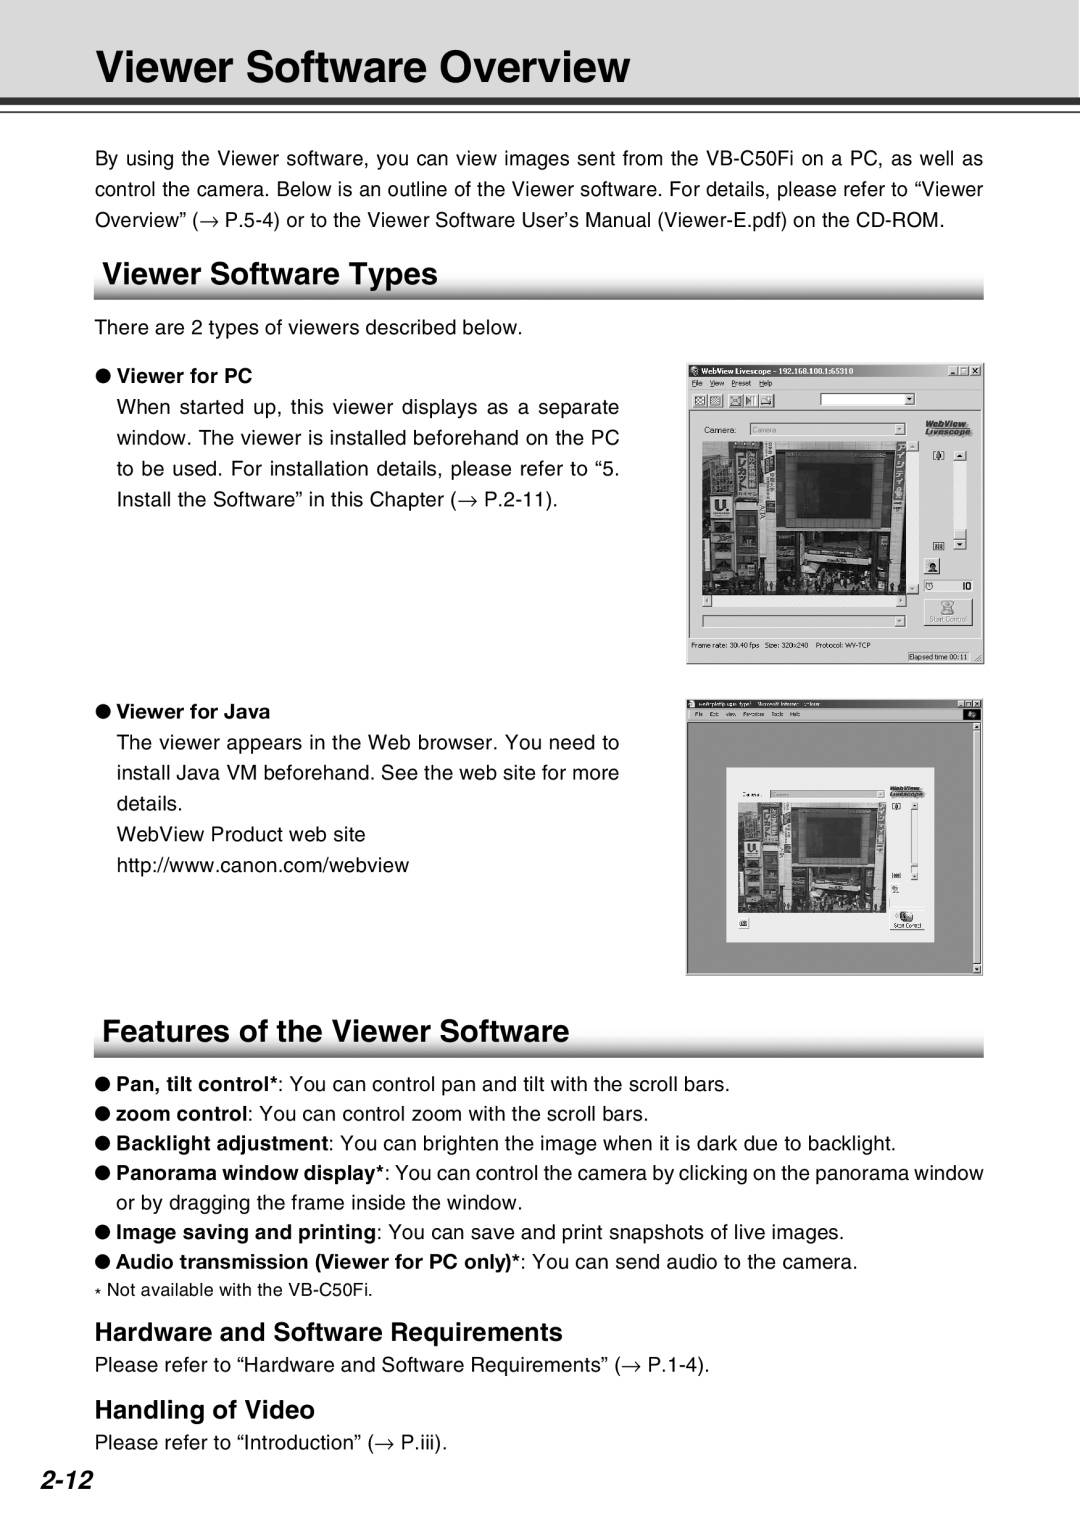 Canon Vb-C50fi Viewer Software Overview, Viewer Software Types, Features of the Viewer Software, Handling of Video, 2-12 